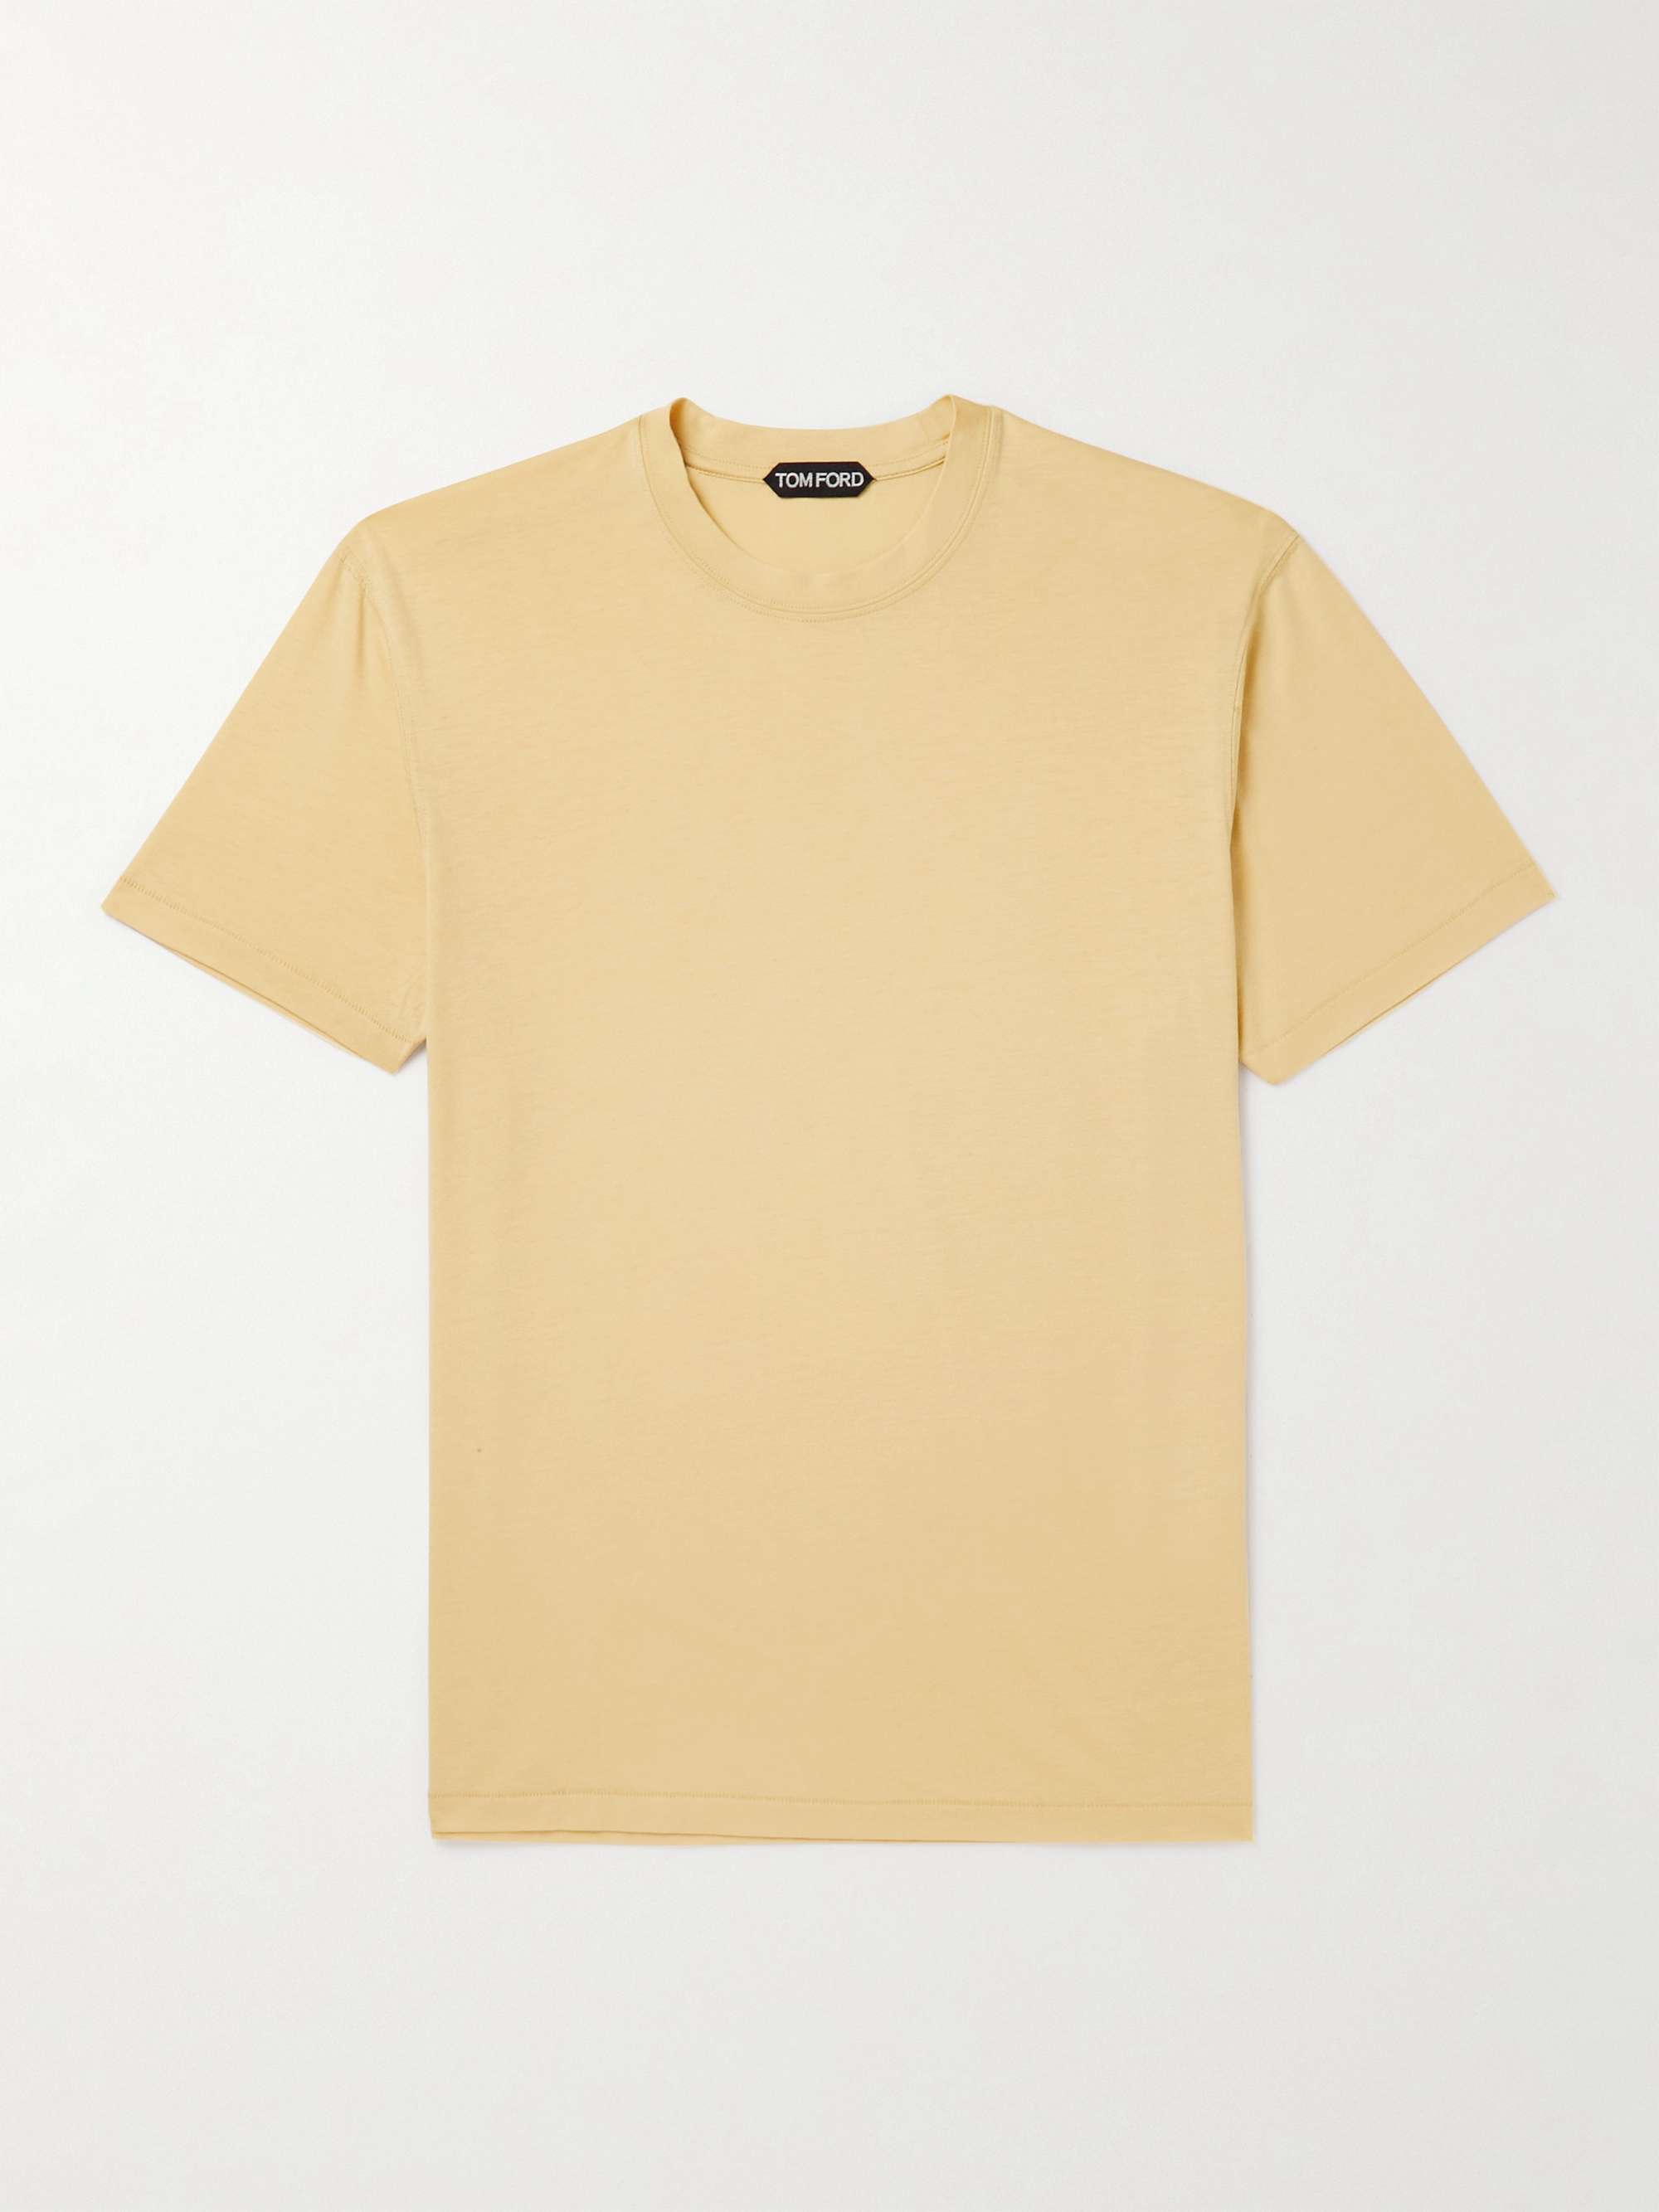 TOM FORD Lyocell and Cotton-Blend Jersey T-Shirt | MR PORTER